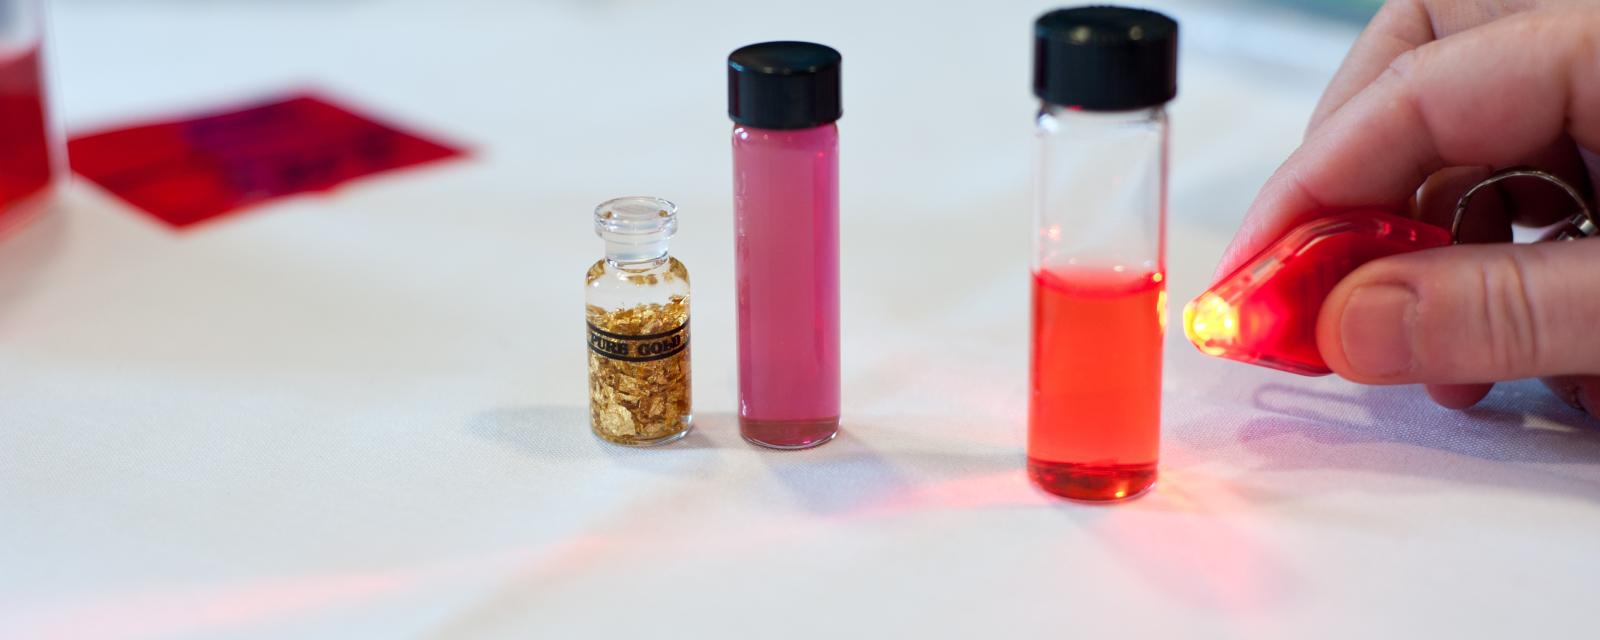 Vials showing nanoscale gold particles that appears red.